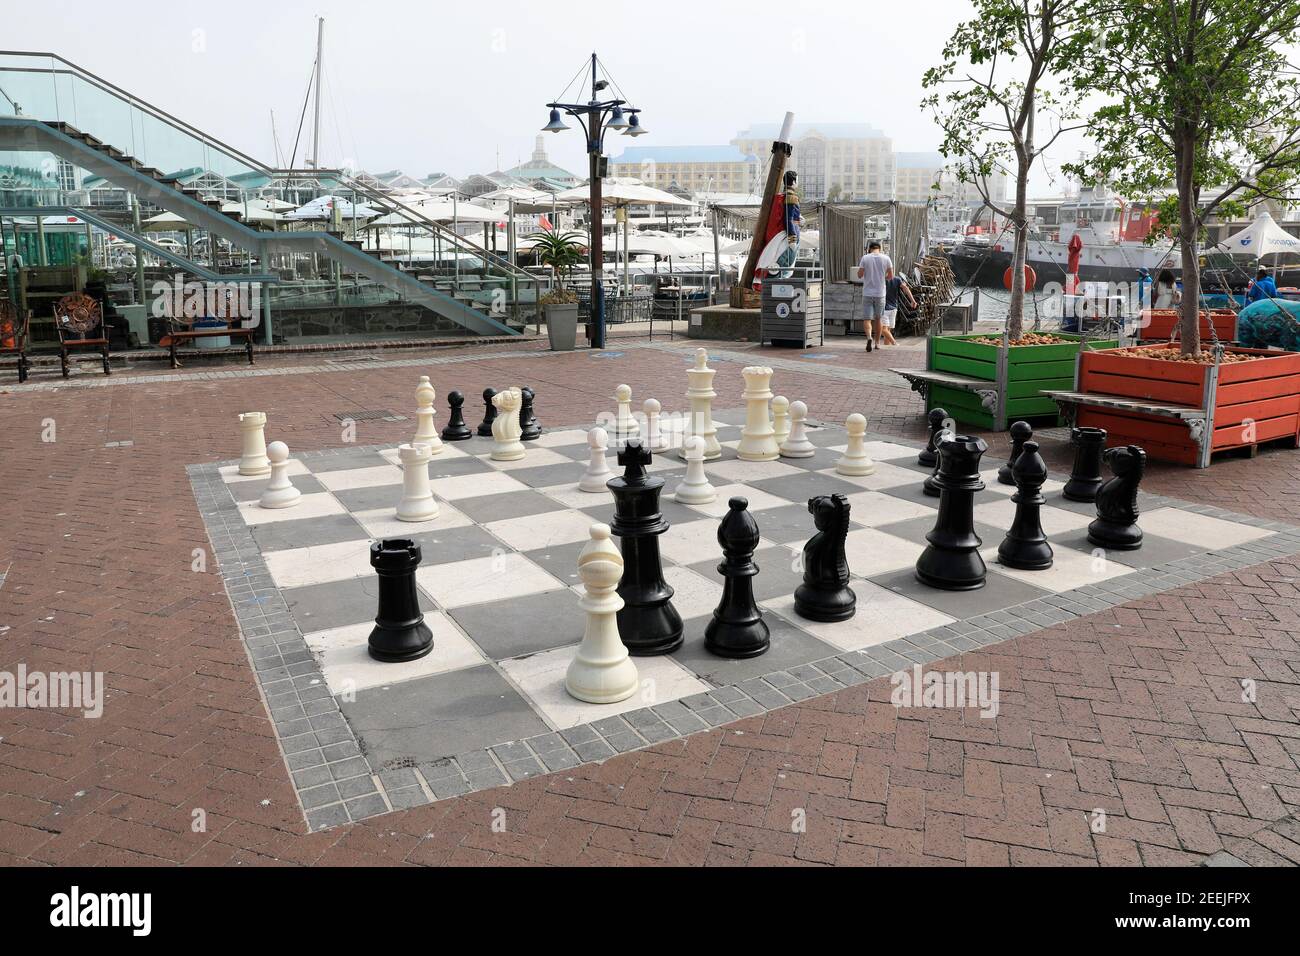 Giant chess board at the V&A Waterfront, Cape Town,Western Cape Province, South Africa. Stock Photo